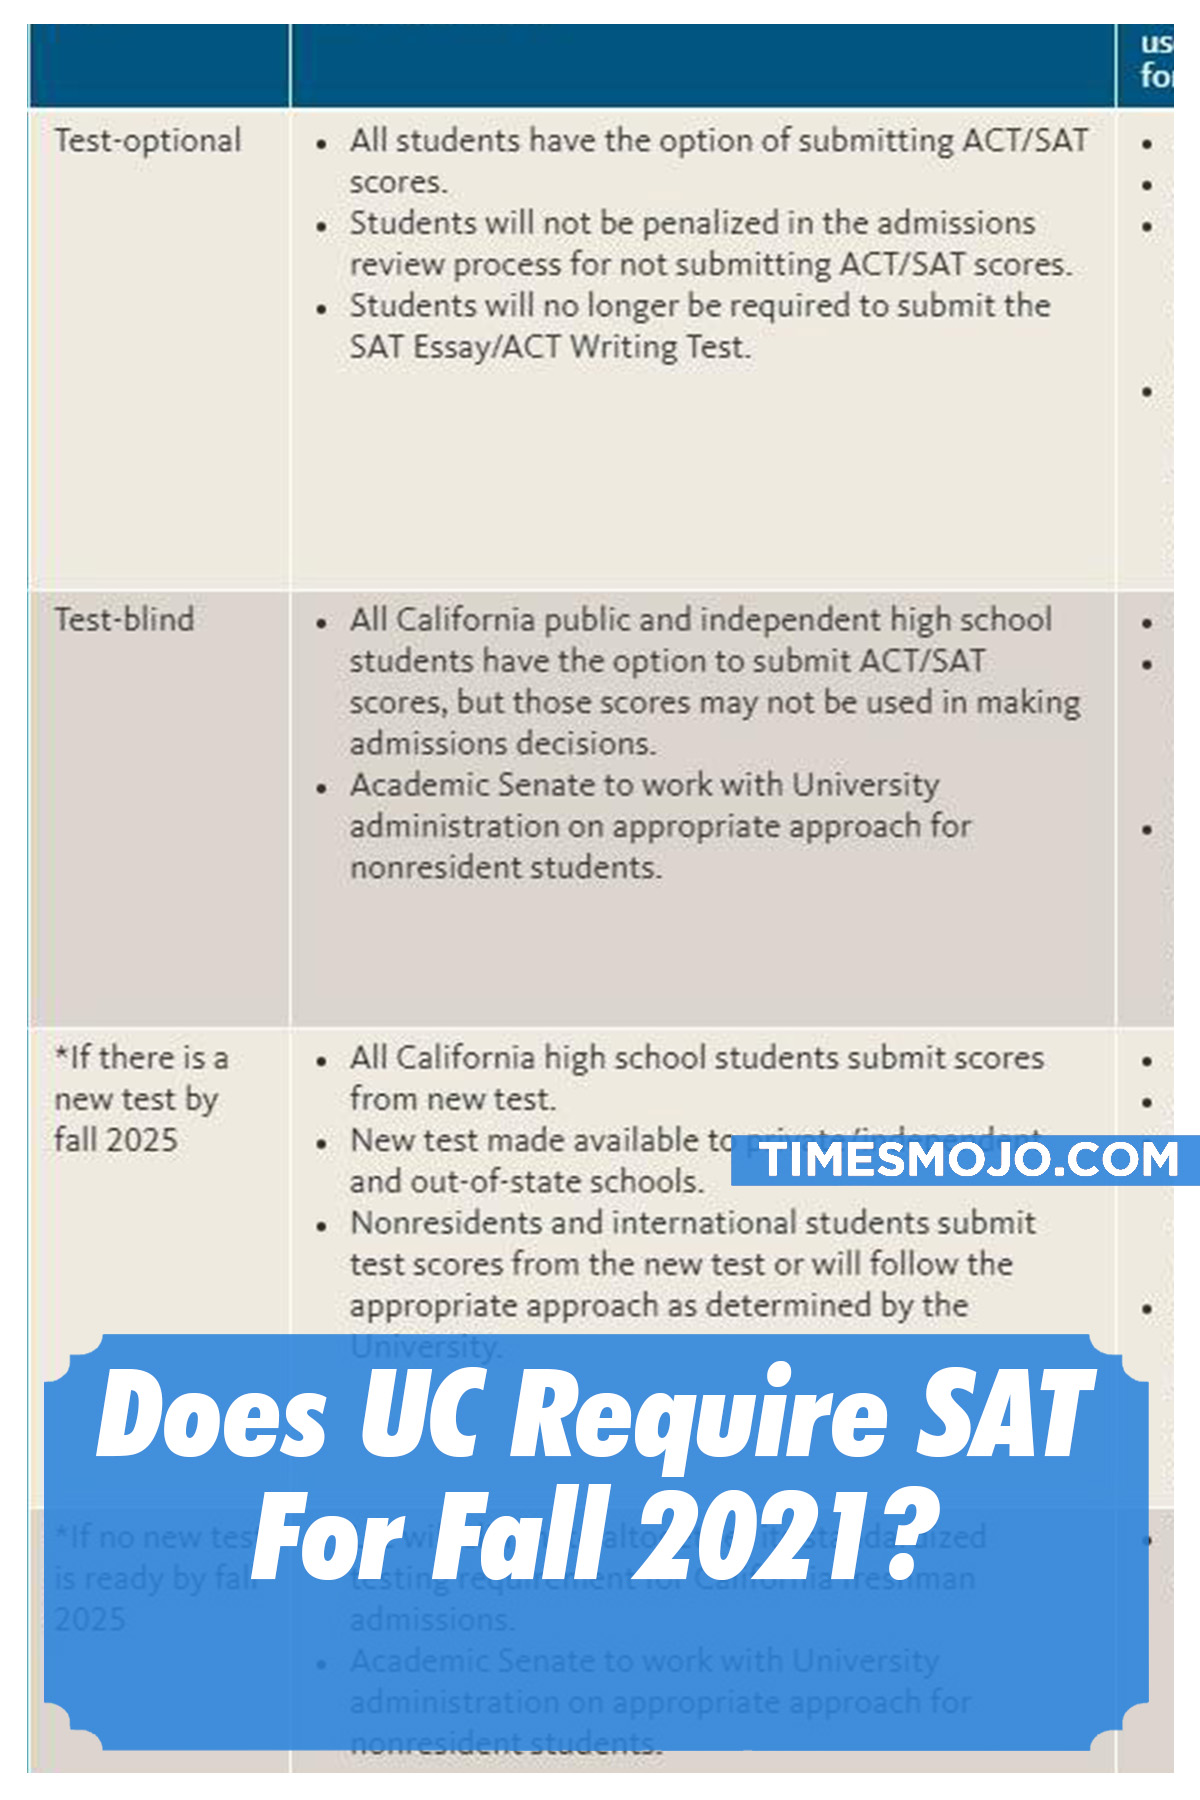 Does UC require SAT for fall 2021? TimesMojo